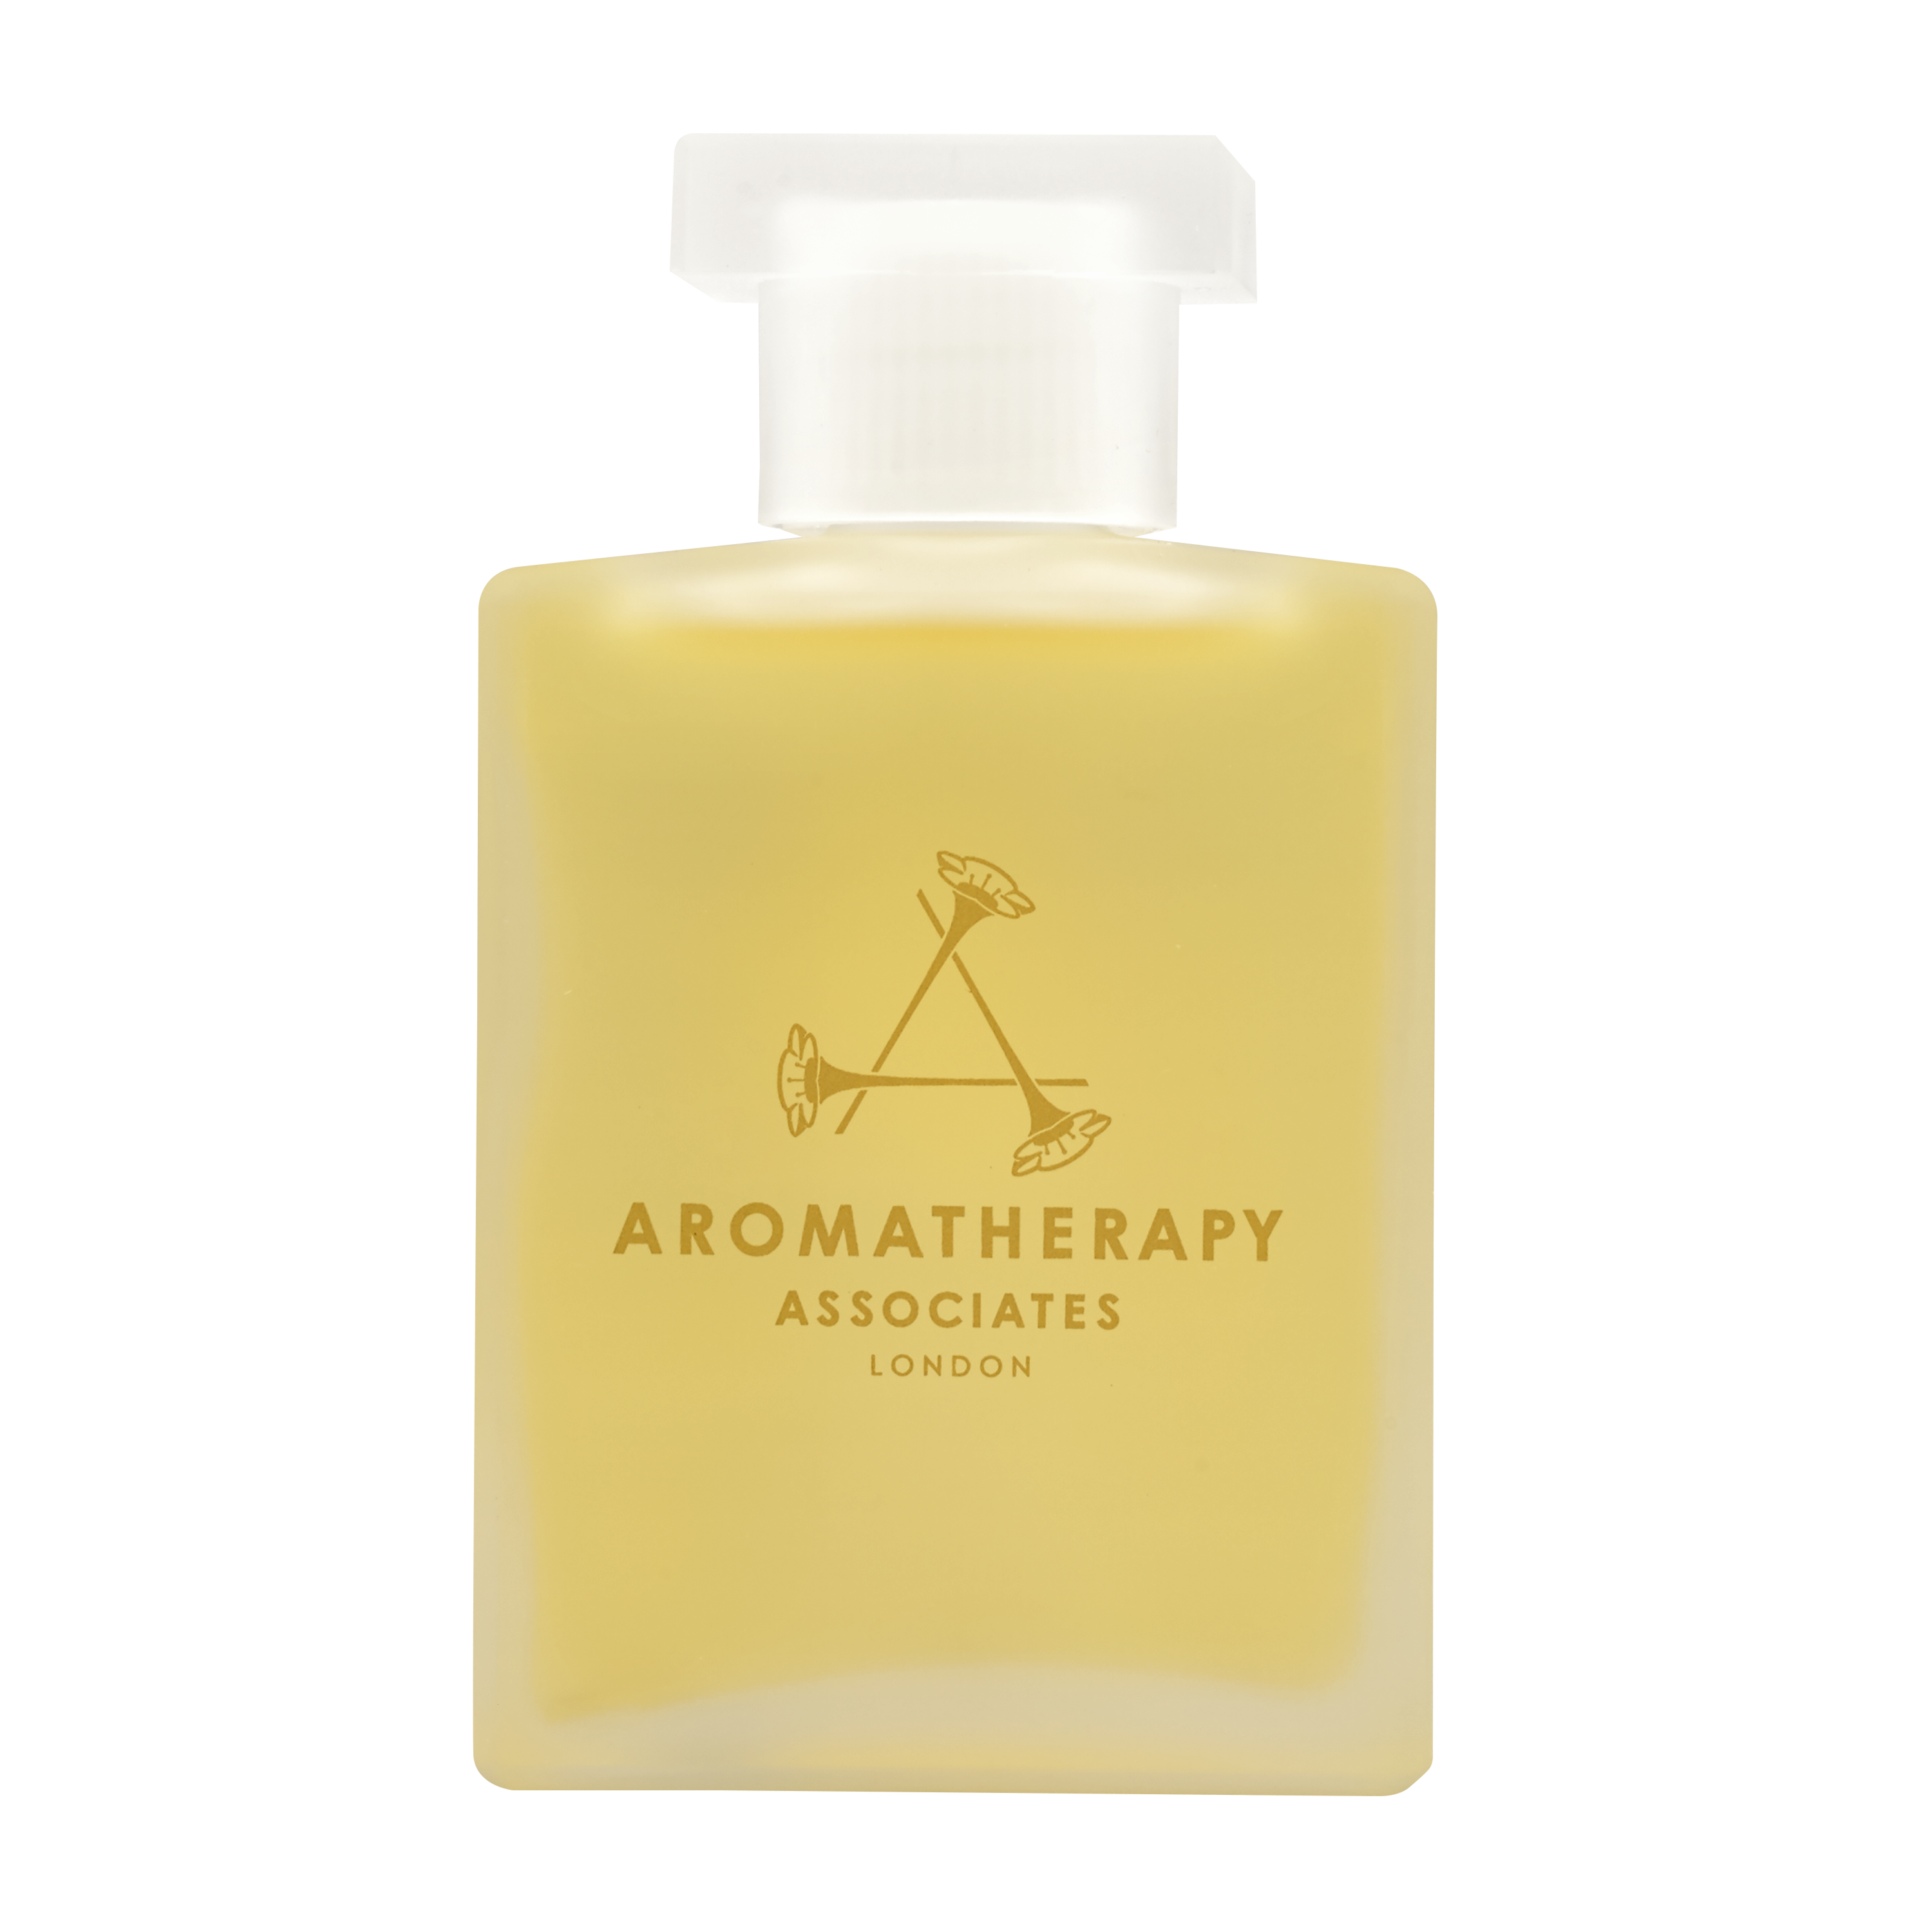 Forest Therapy Bath & Shower Oil 55ml Aromatherapy Associates